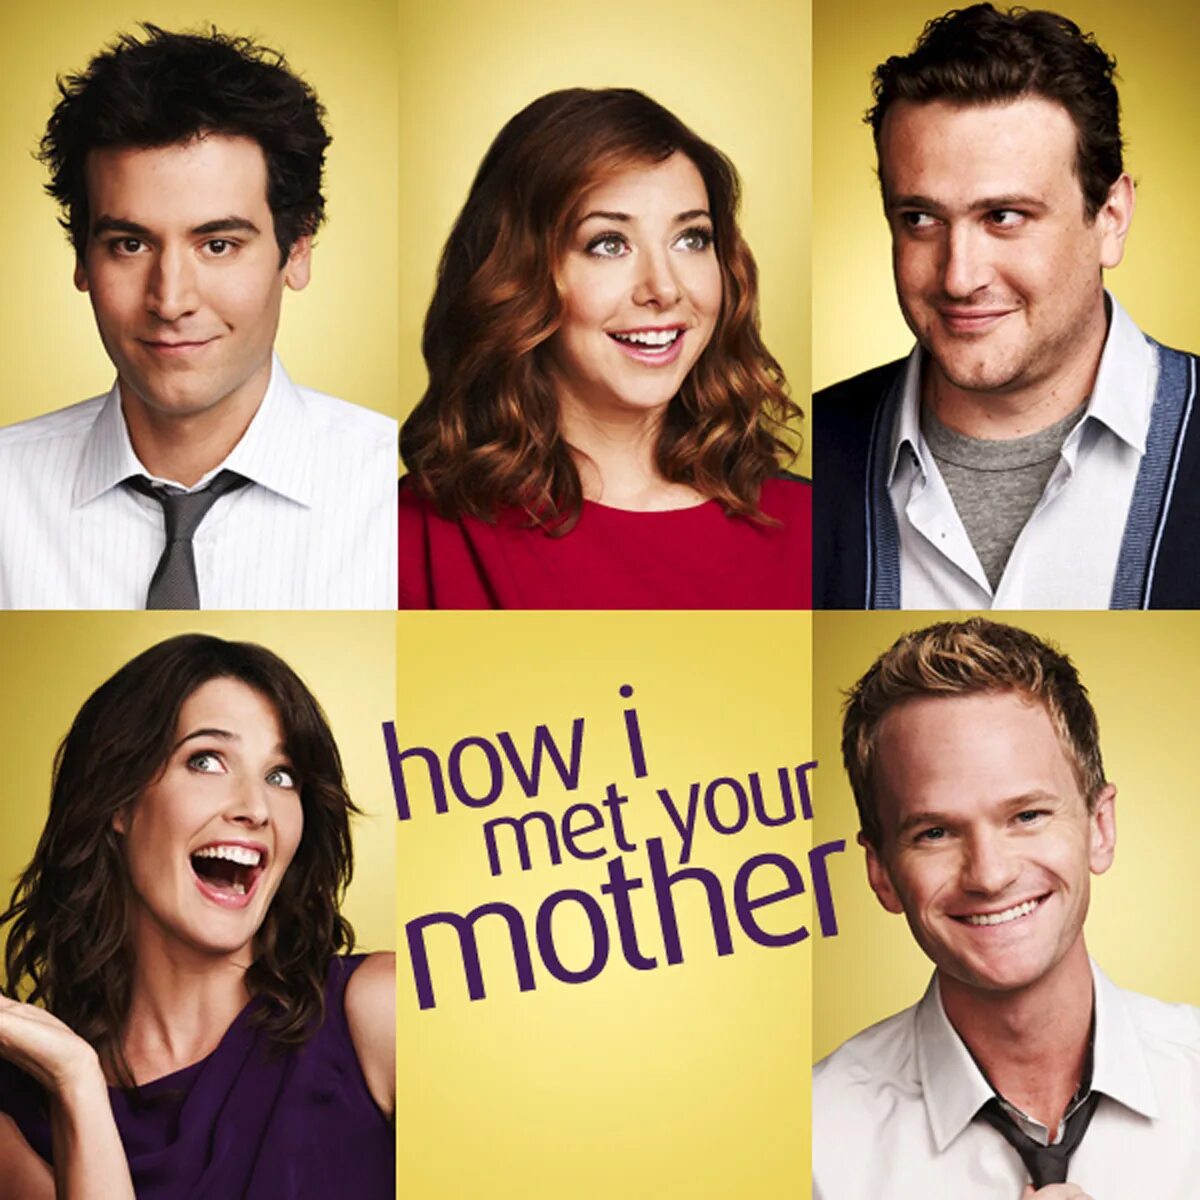 How i met your mother poster.